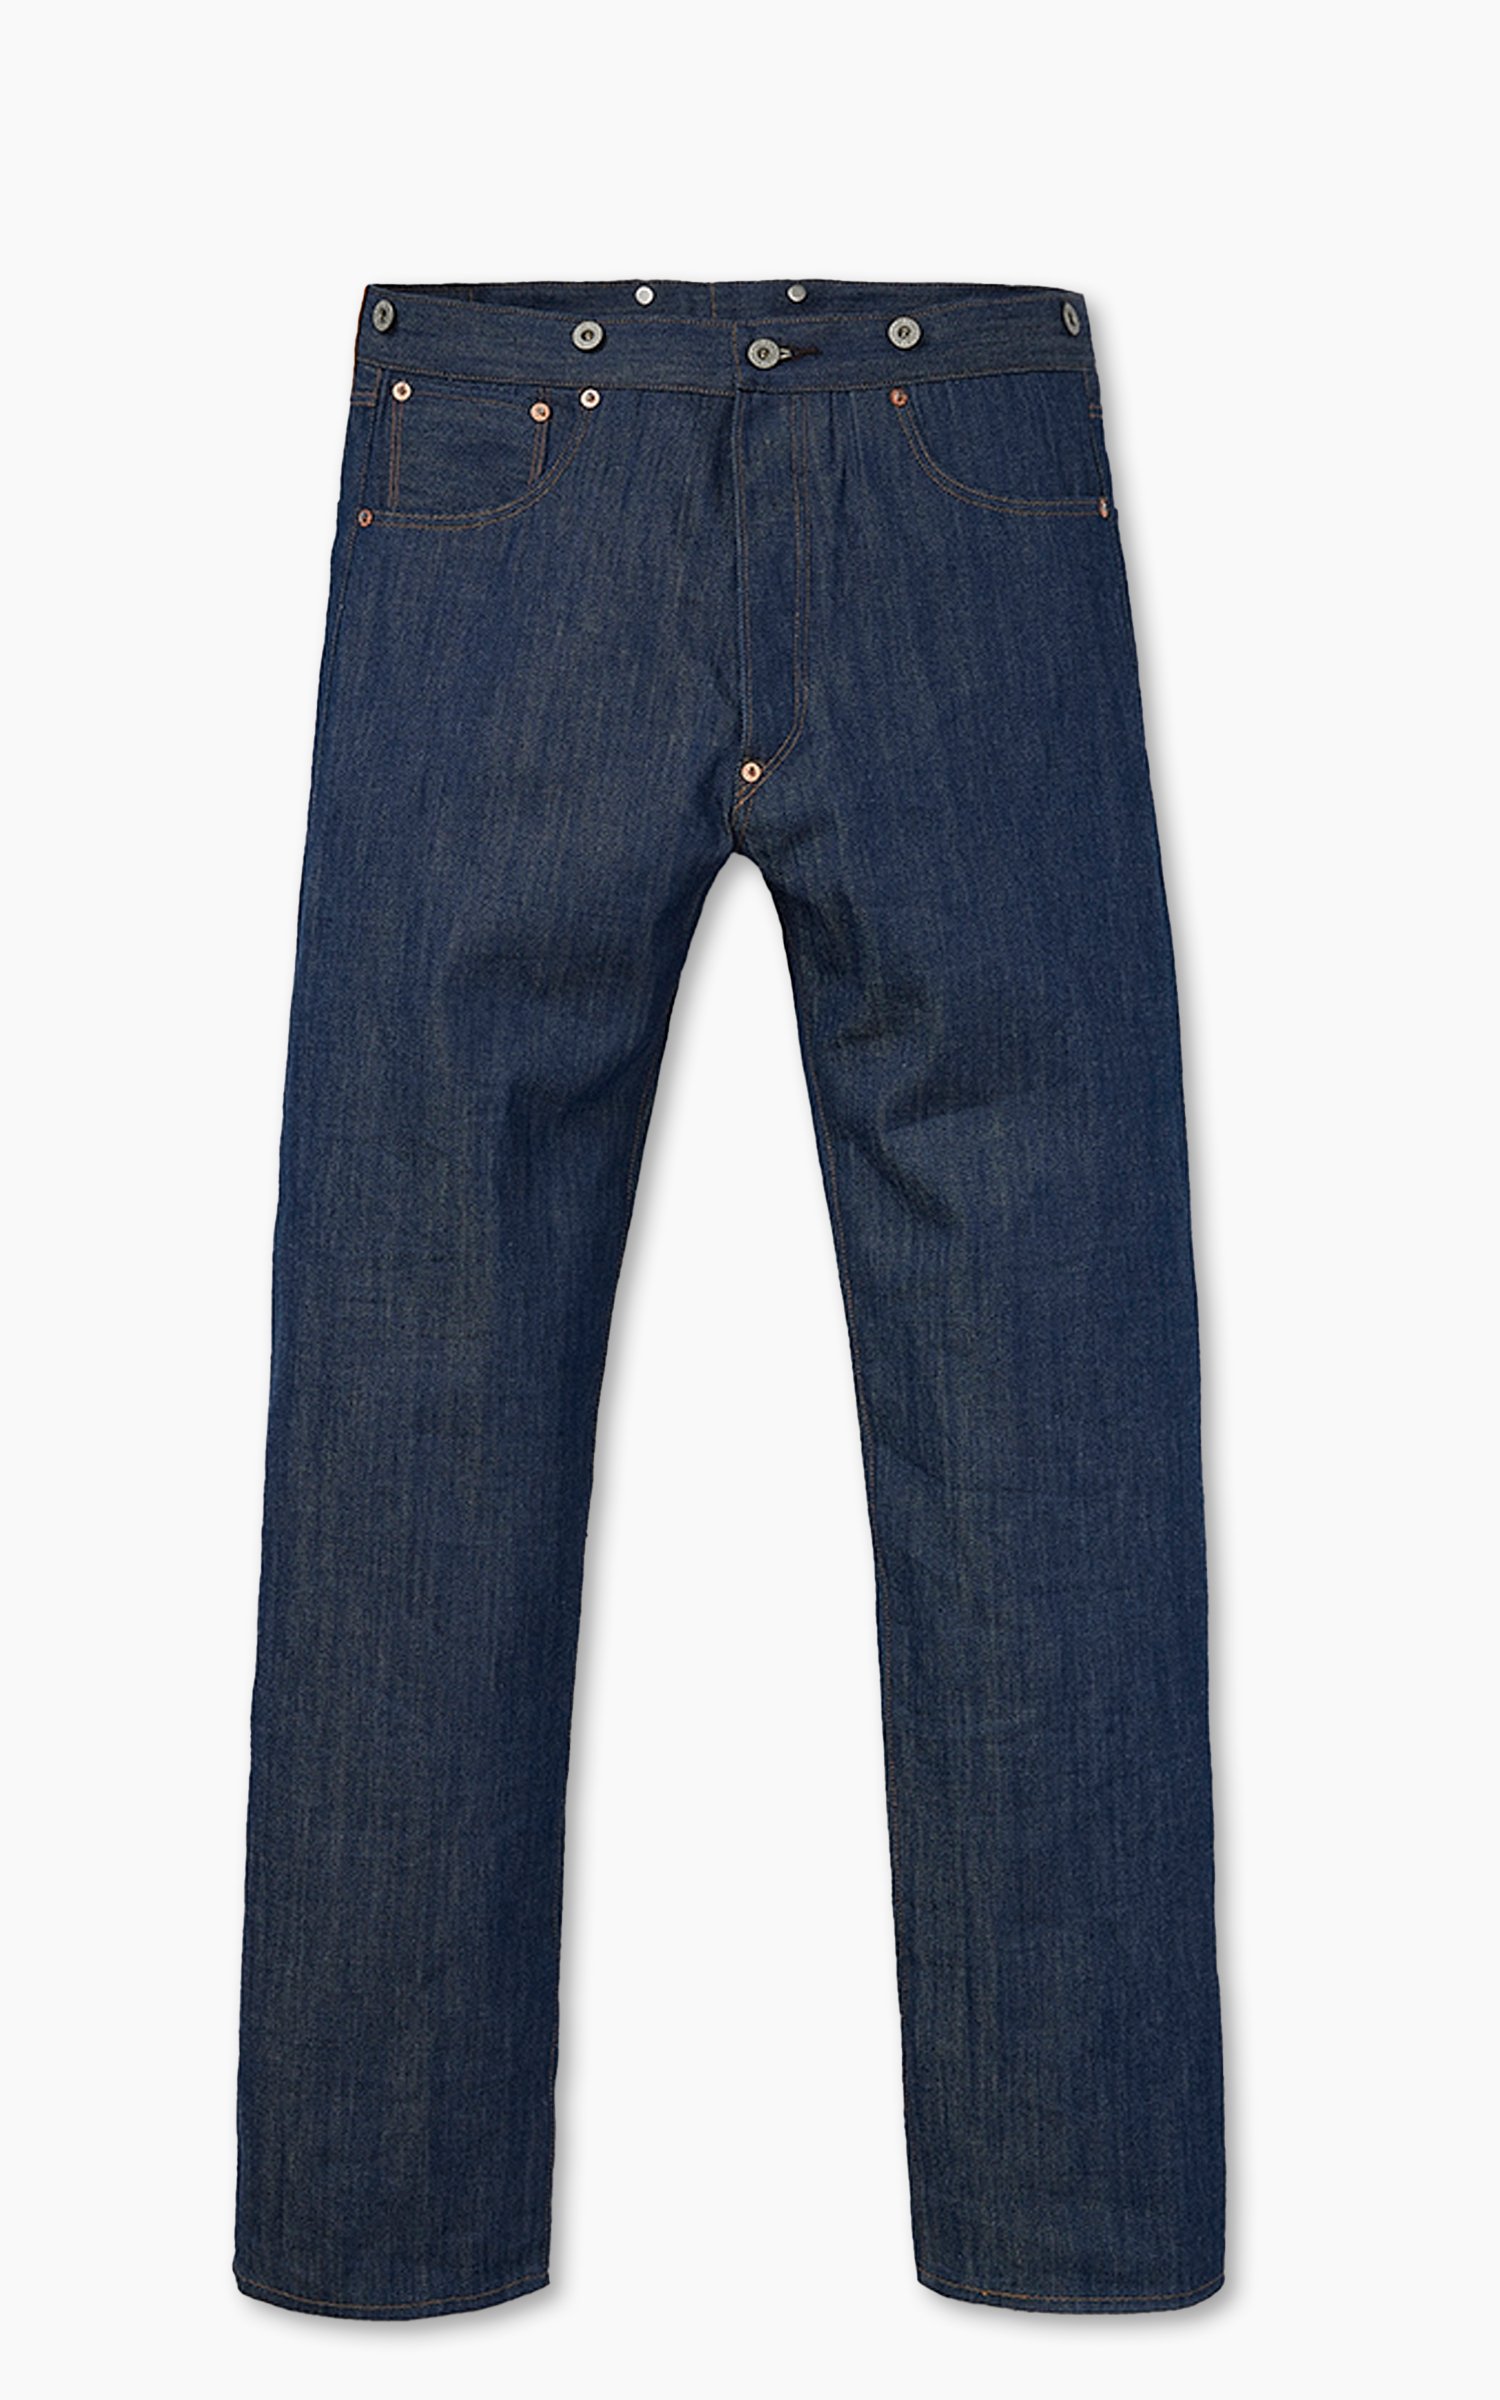 Levi's® Vintage Clothing 1901 501 Jeans Cone Mills Limited Edition ...